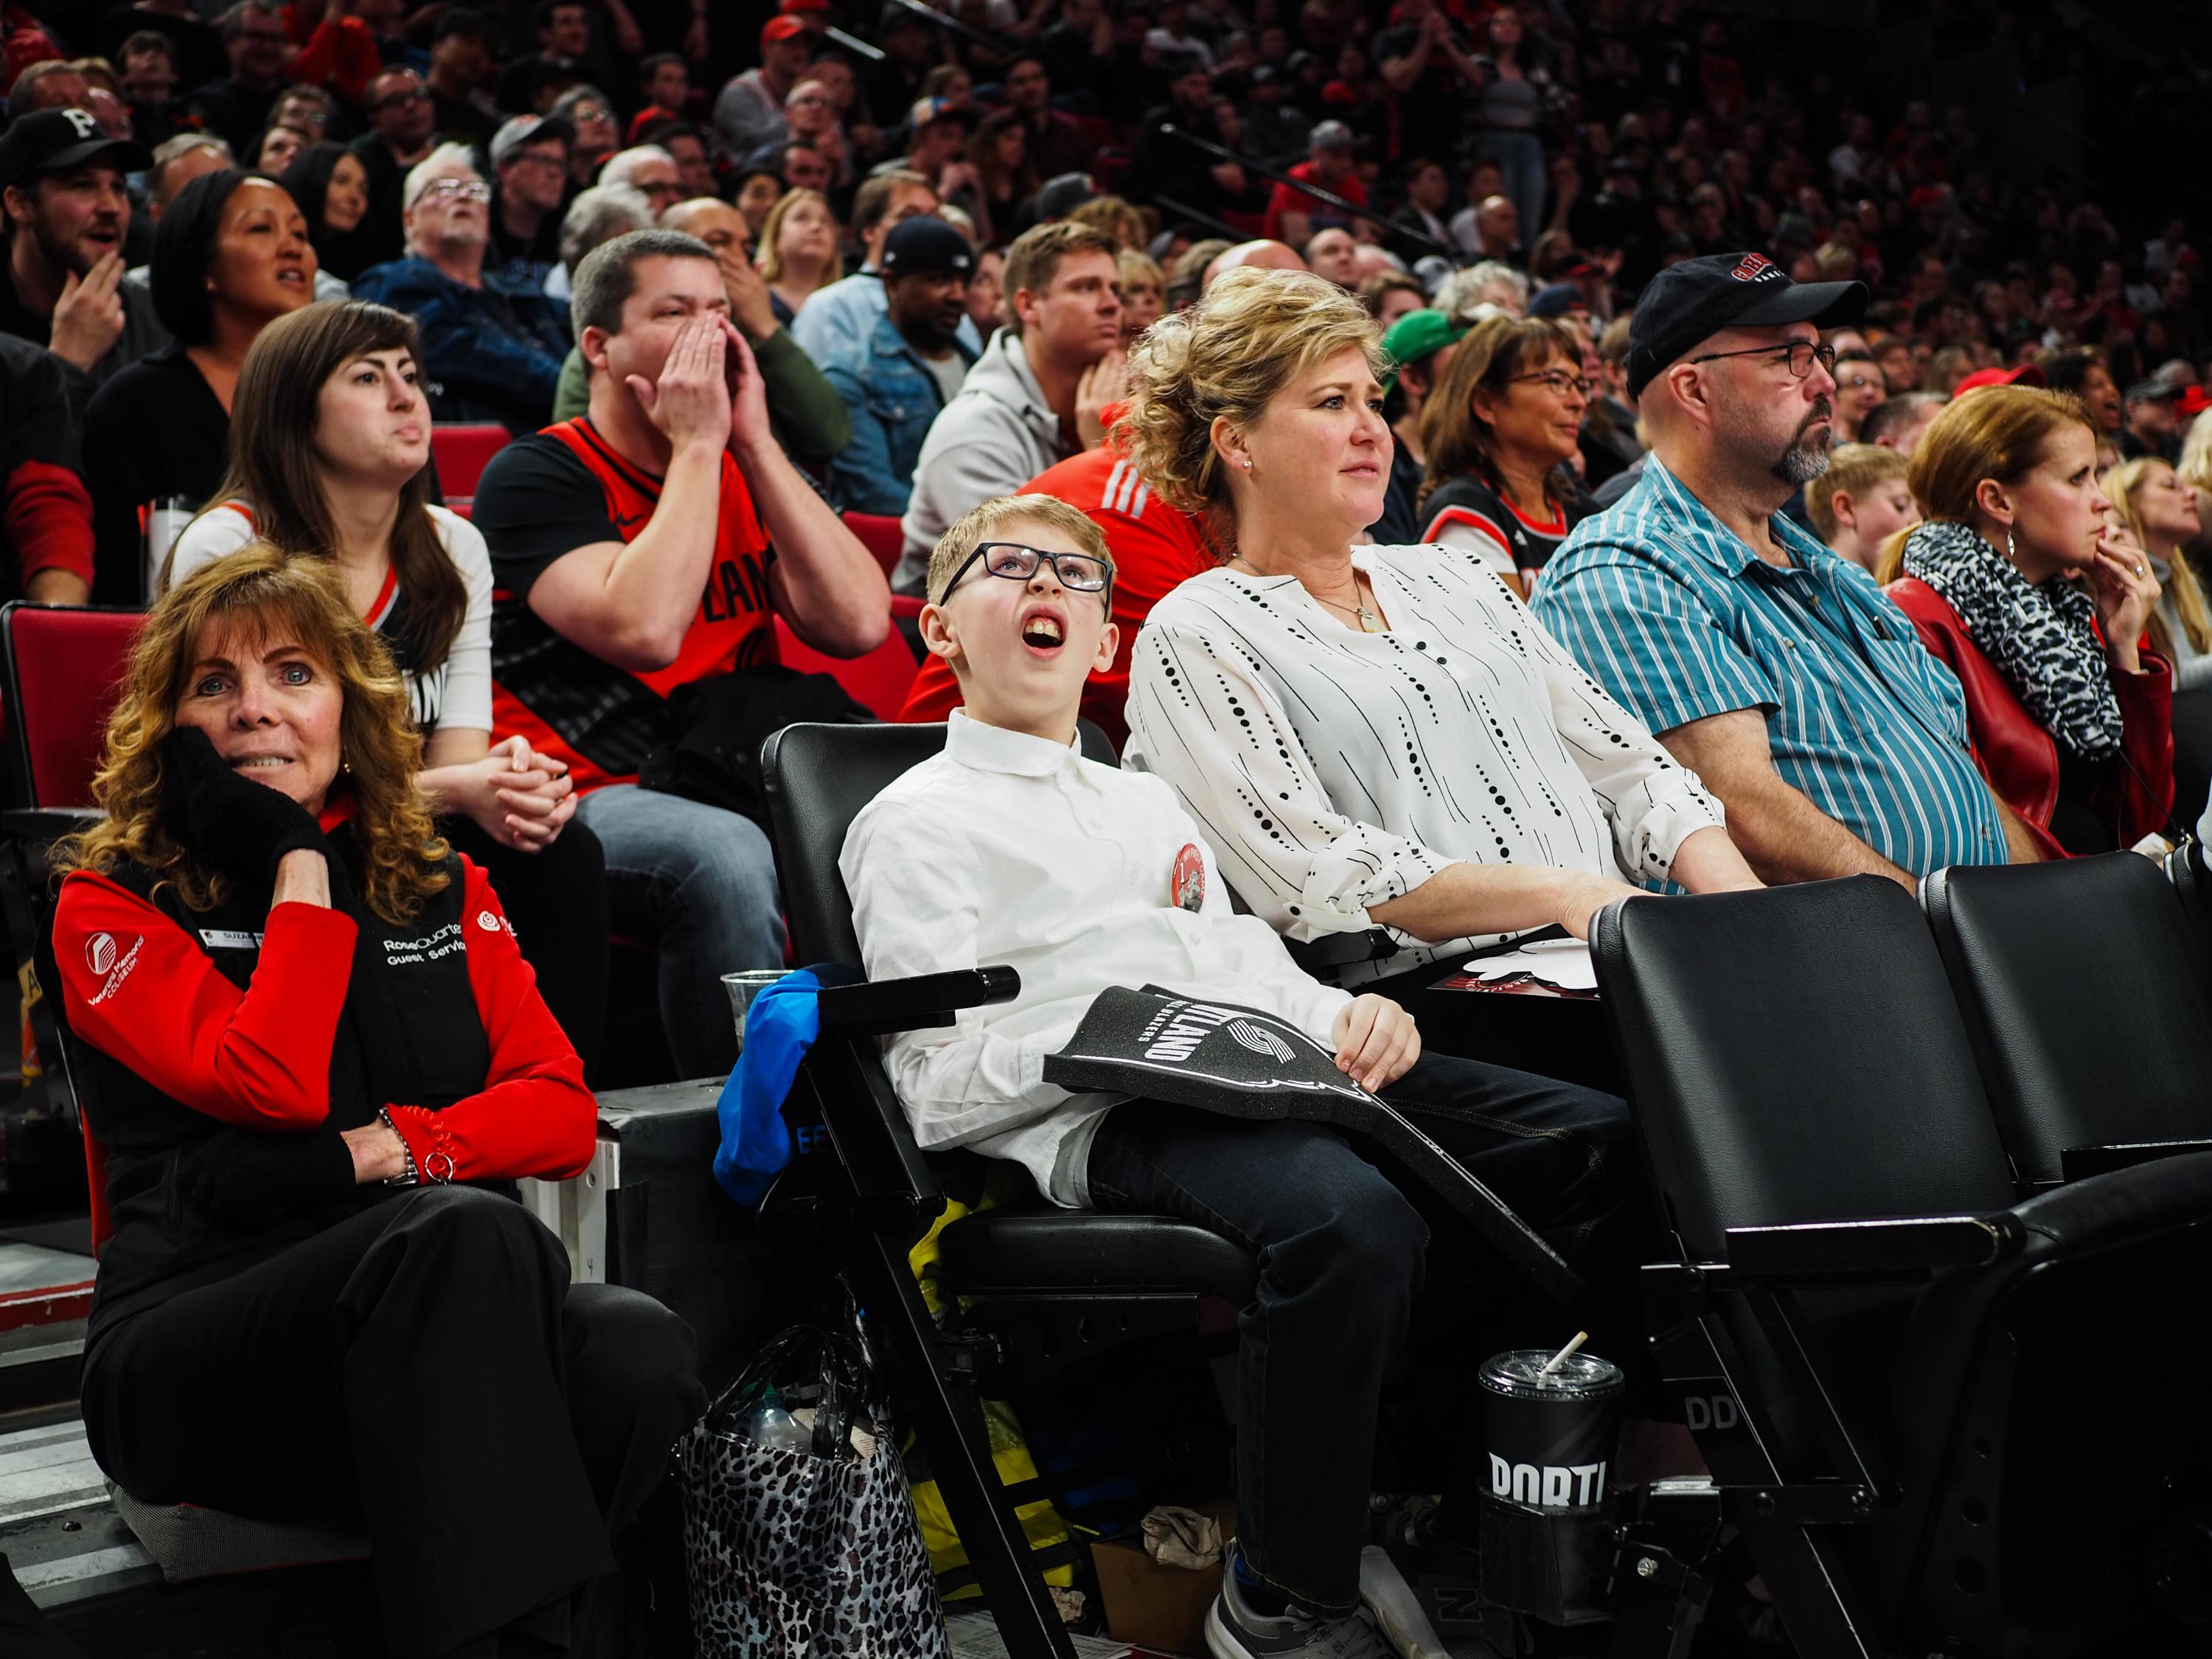 Is it time the Portland Trail Blazers move on from the Moda Center?